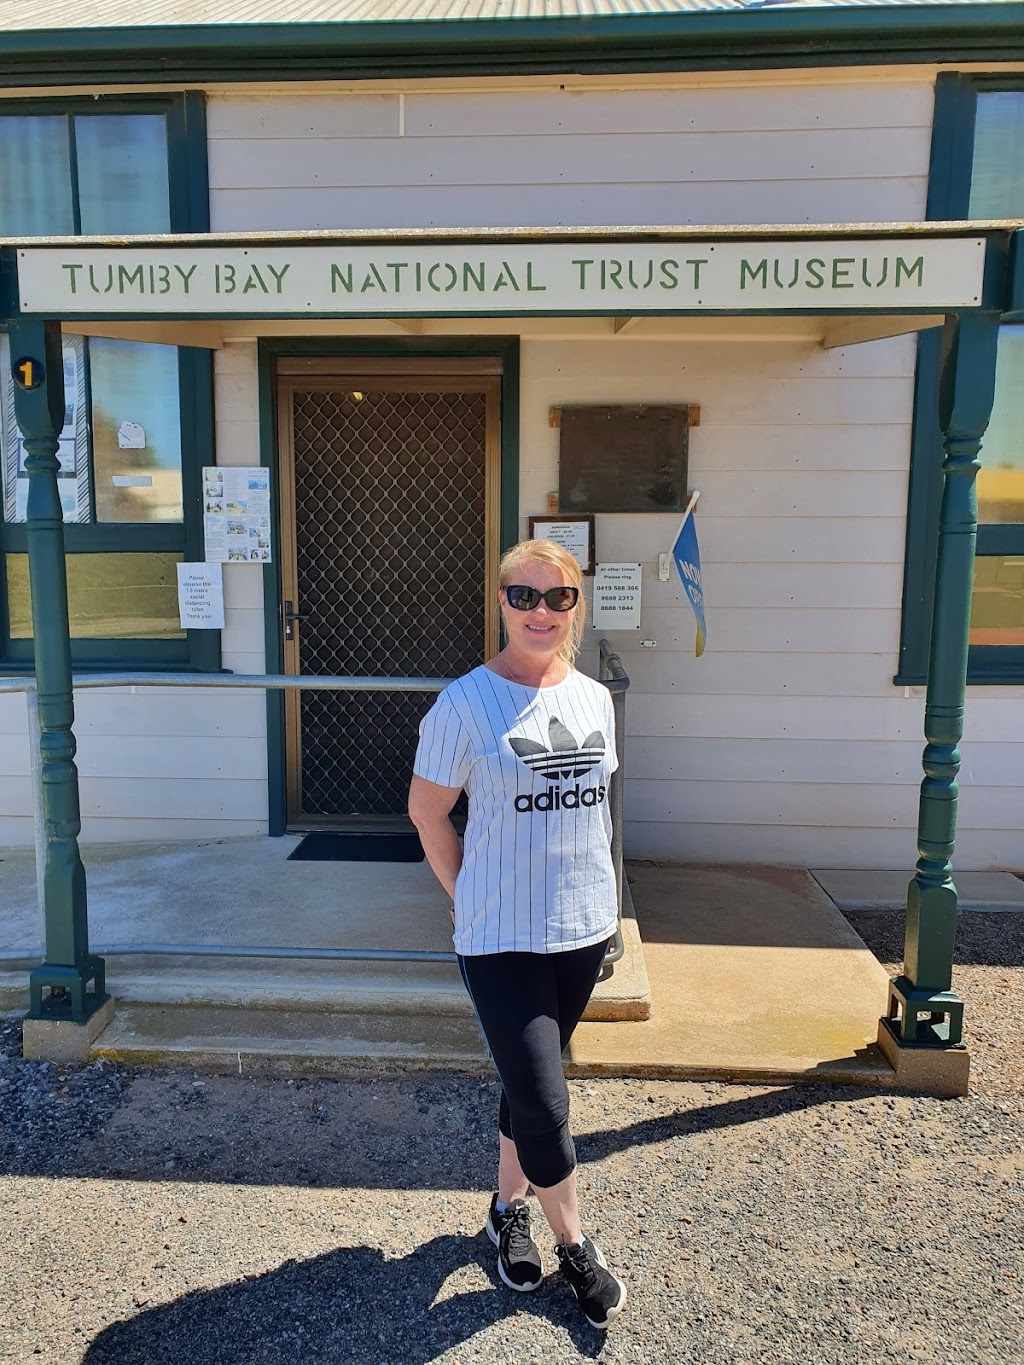 Tumby Bay National Trust Museum | museum | 5 West Terrace, Tumby Bay SA 5605, Australia | 0428350670 OR +61 428 350 670